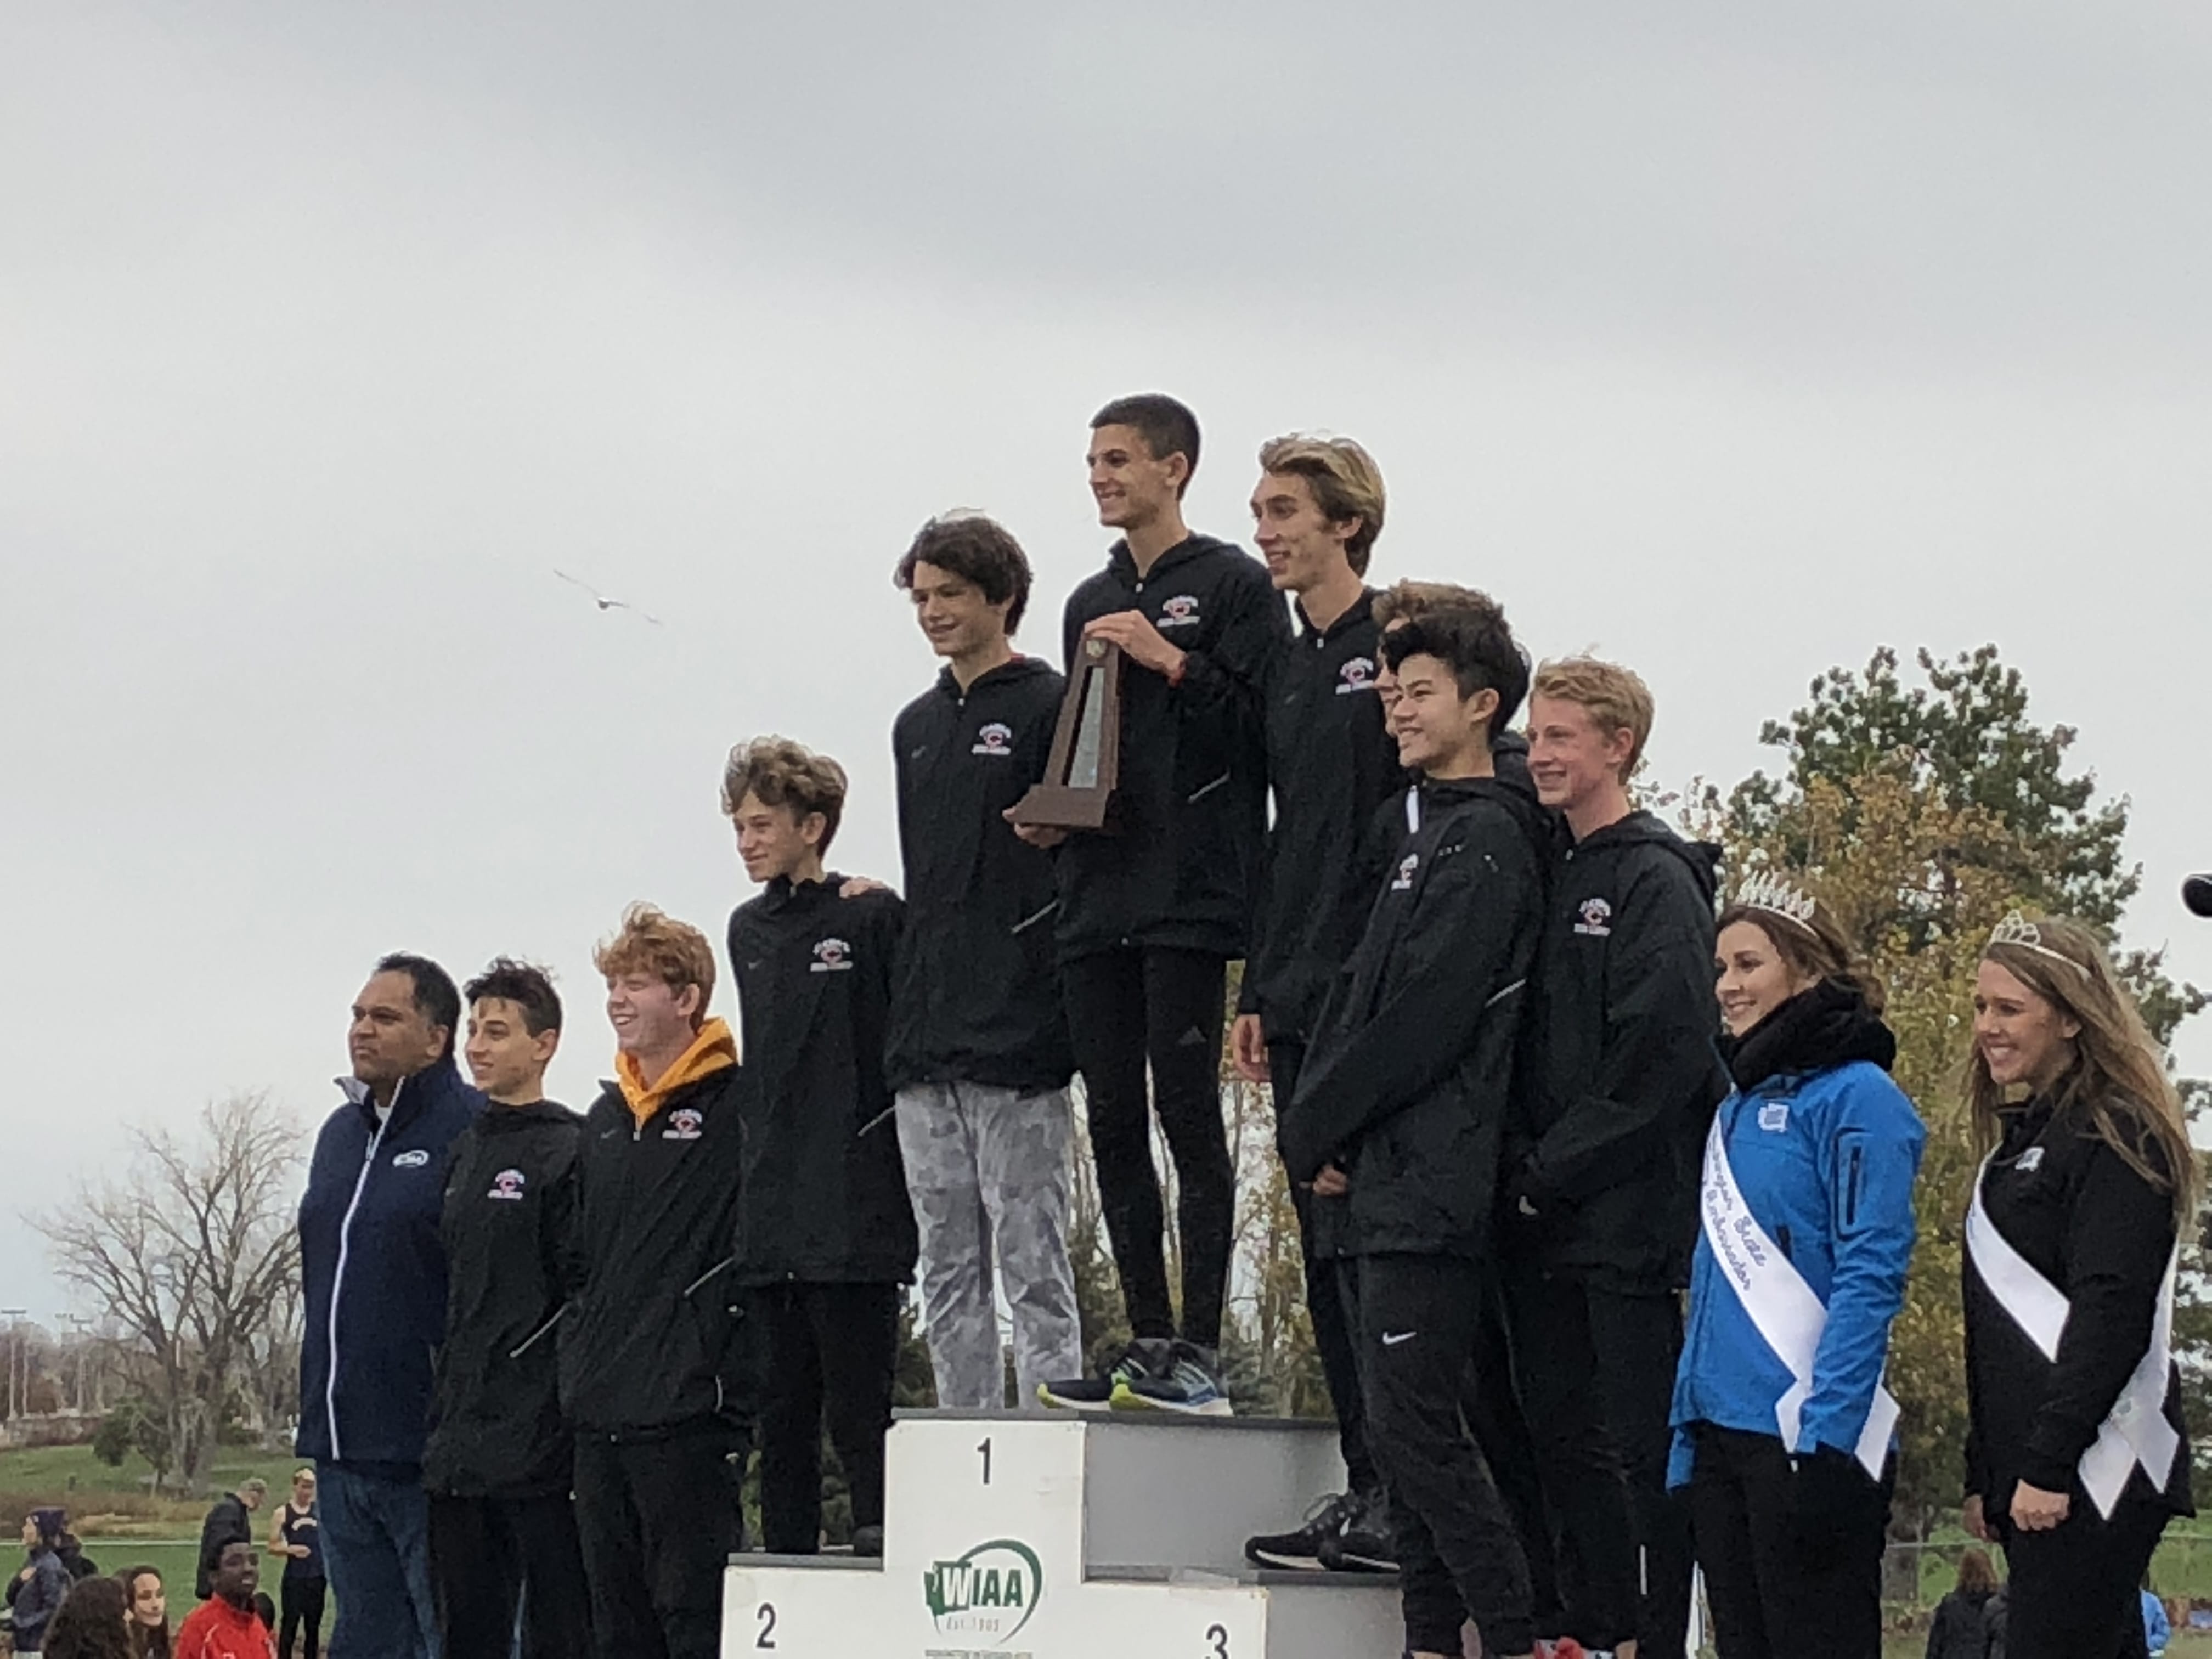 The Camas boys team claims the third-place trophy in Class 4A at the WIAA State Cross Country Championships Saturday in Pasco.